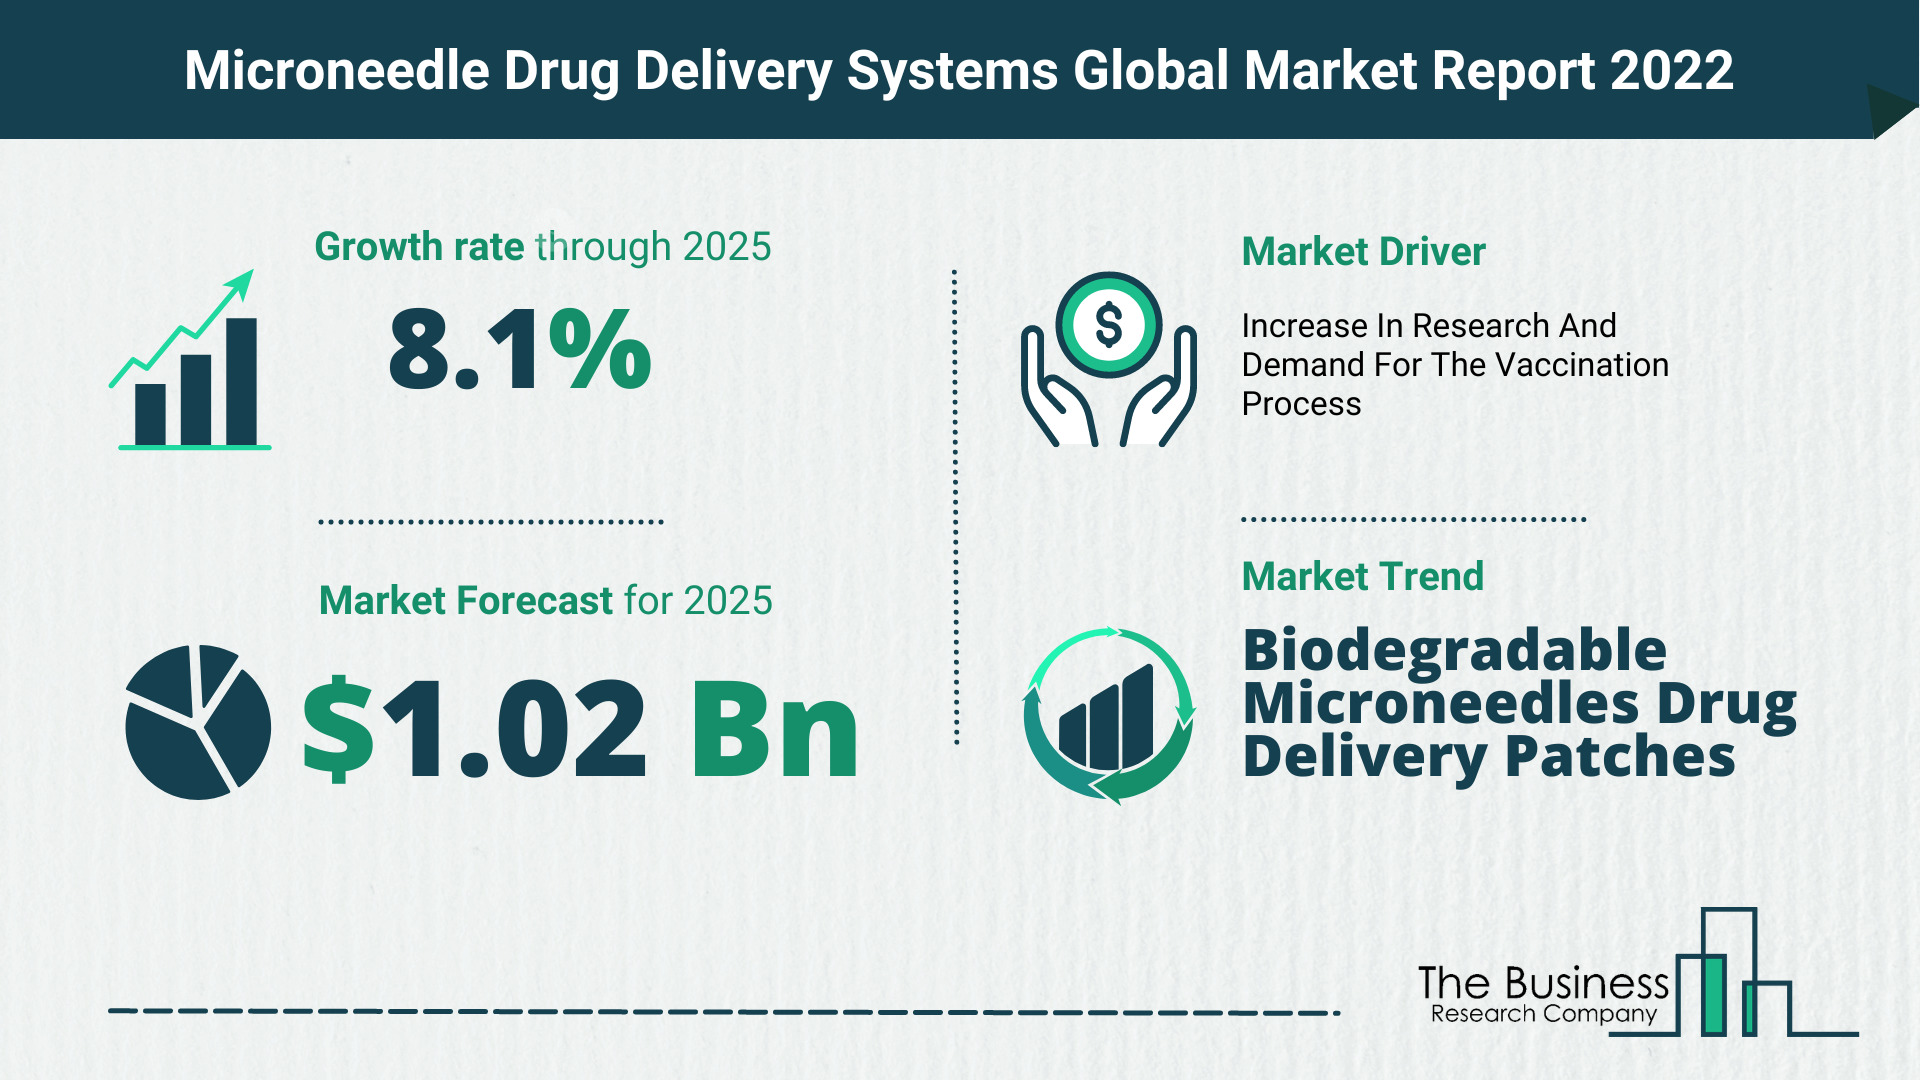 What Is The Microneedle Drug Delivery Market Overview In 2022?